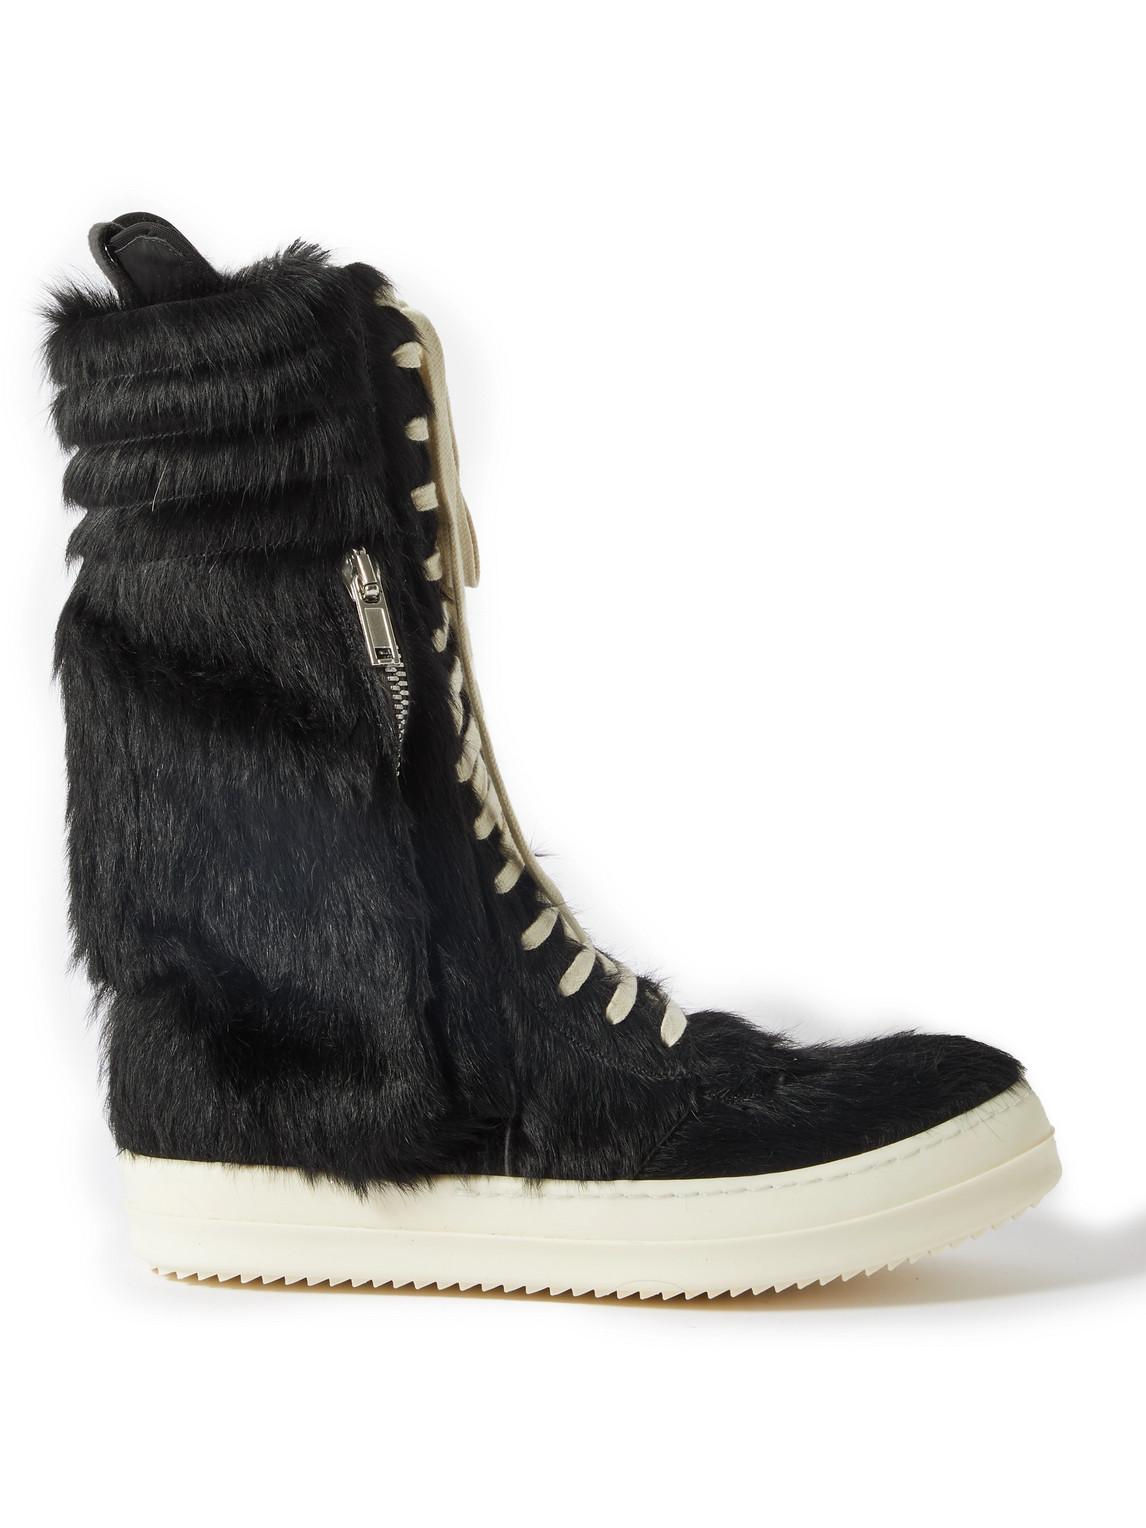 Rick Owens Cargo Basket Faux Fur And Leather High-top Sneakers in Black ...